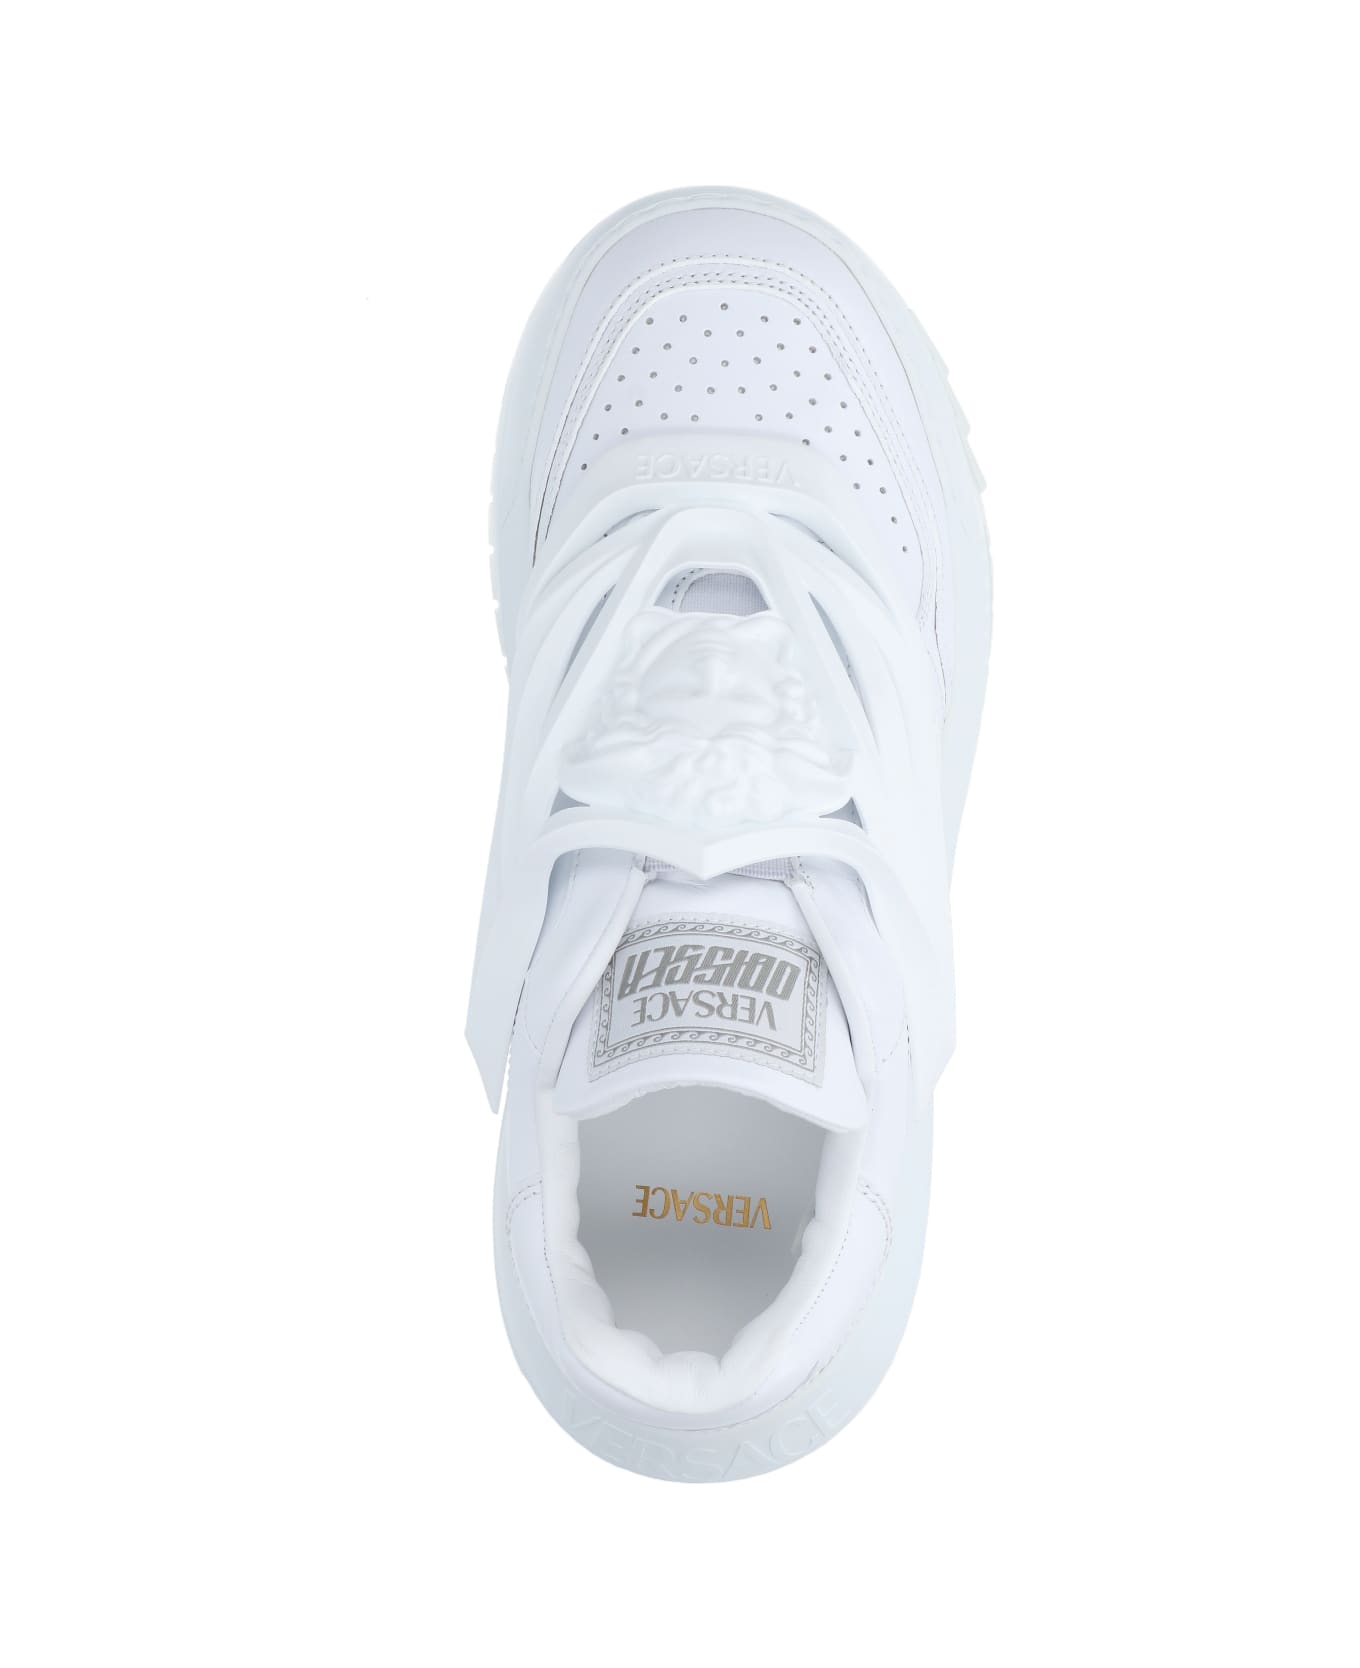 Versace "odissea" Sneakers - White